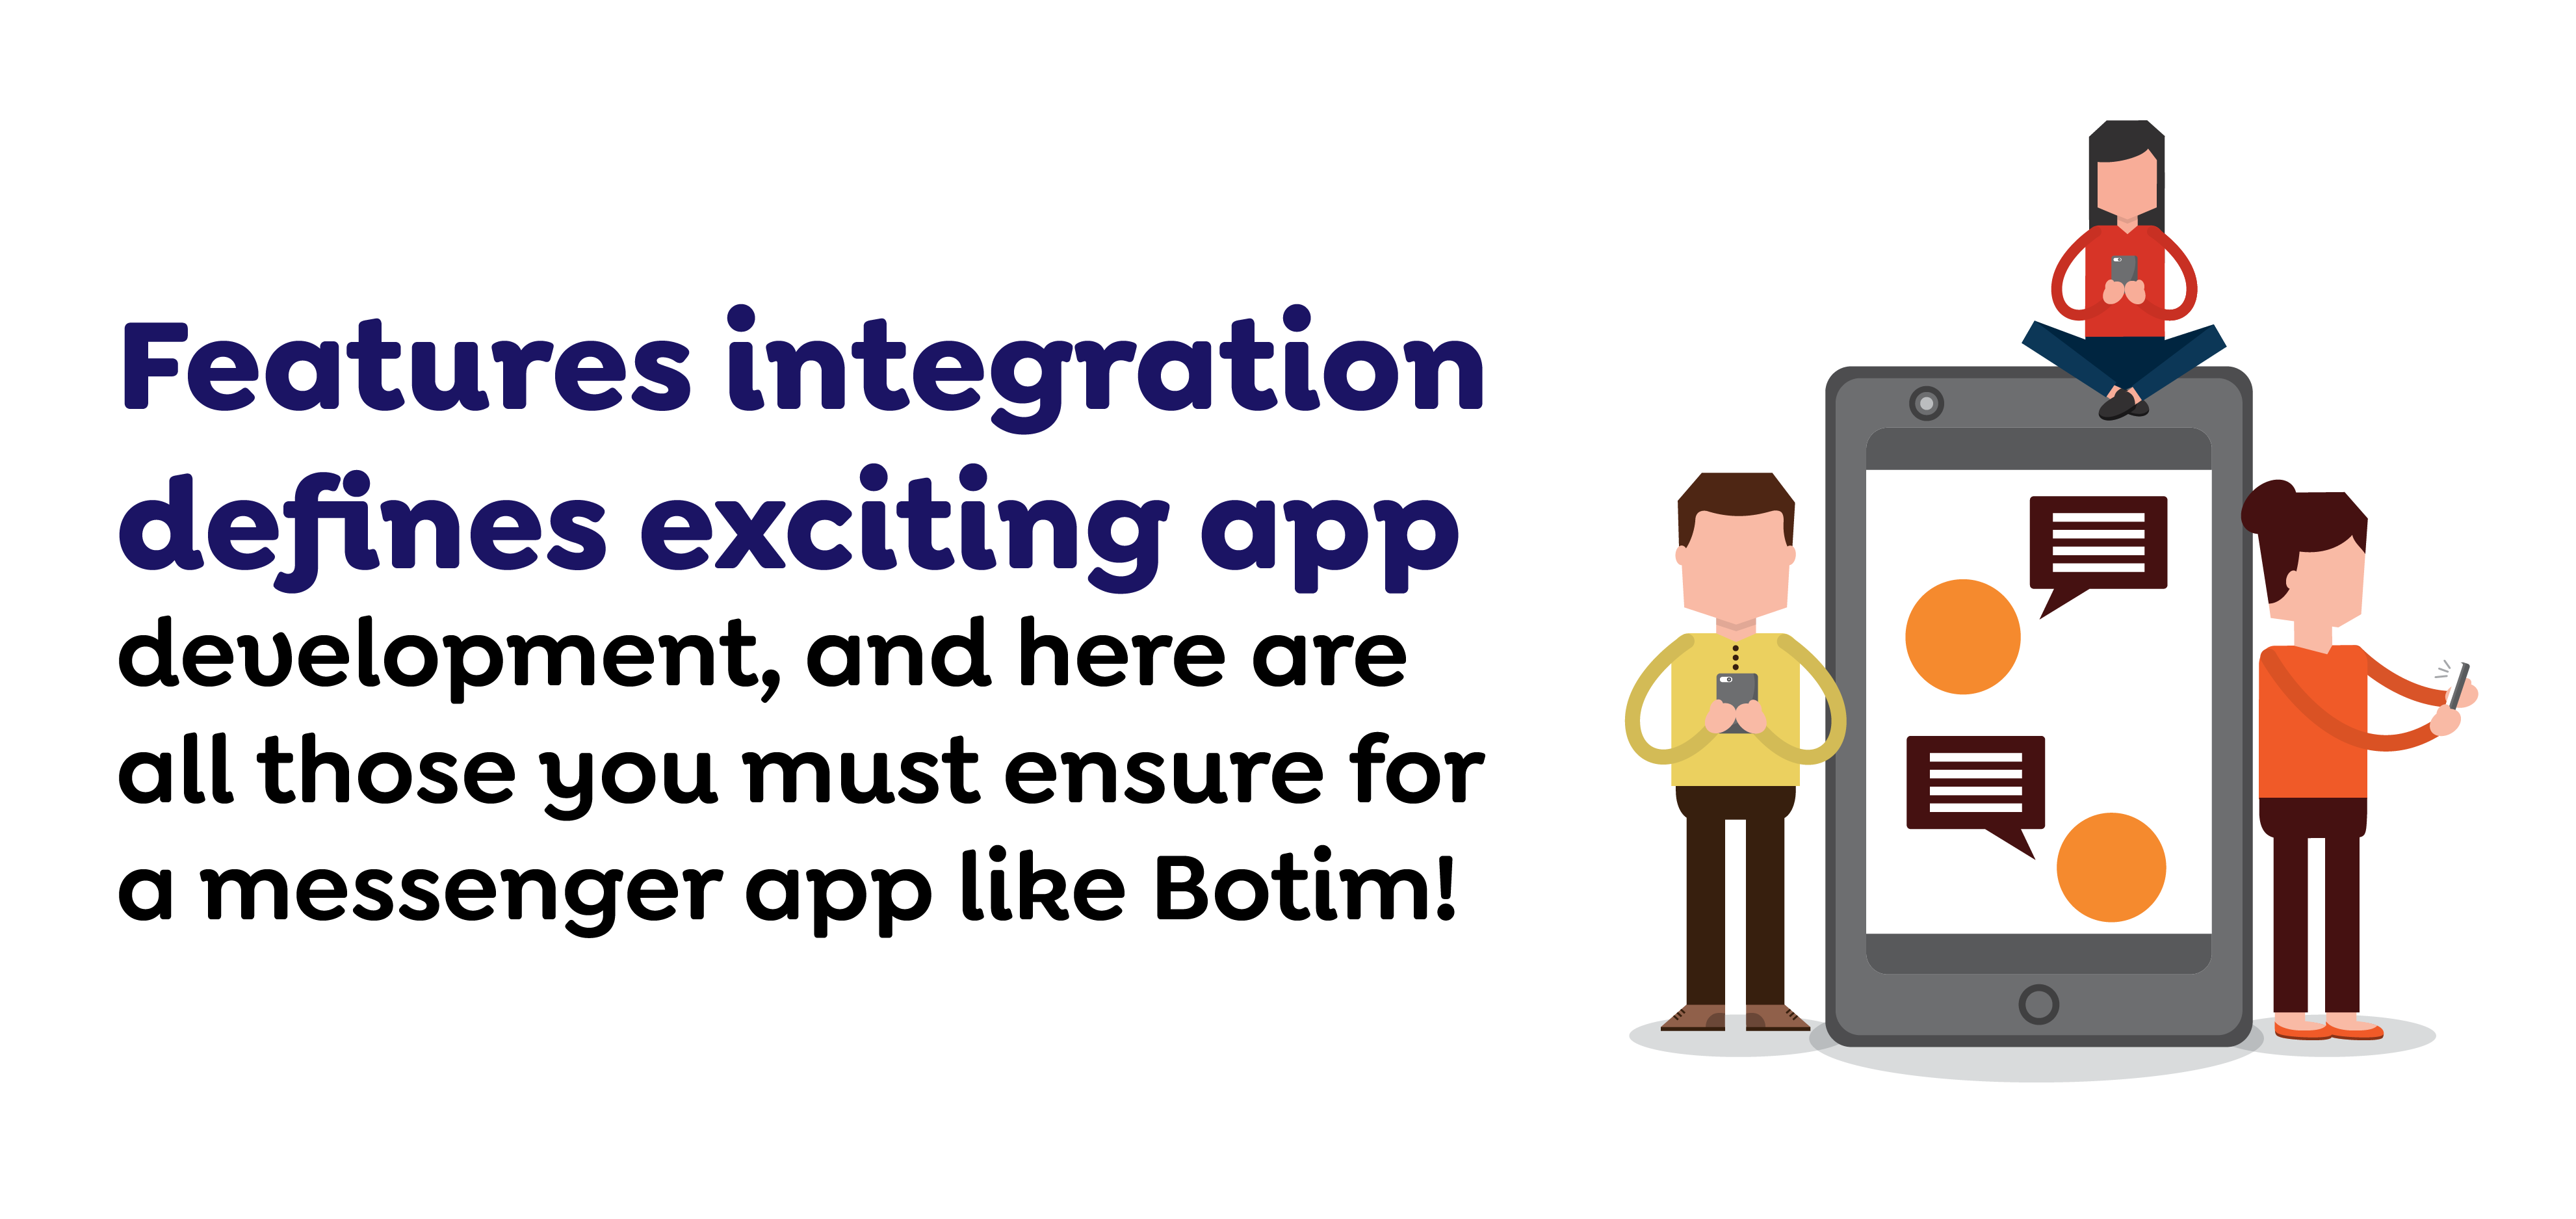 Features integration defines exciting app development, and here are all those you must ensure for a